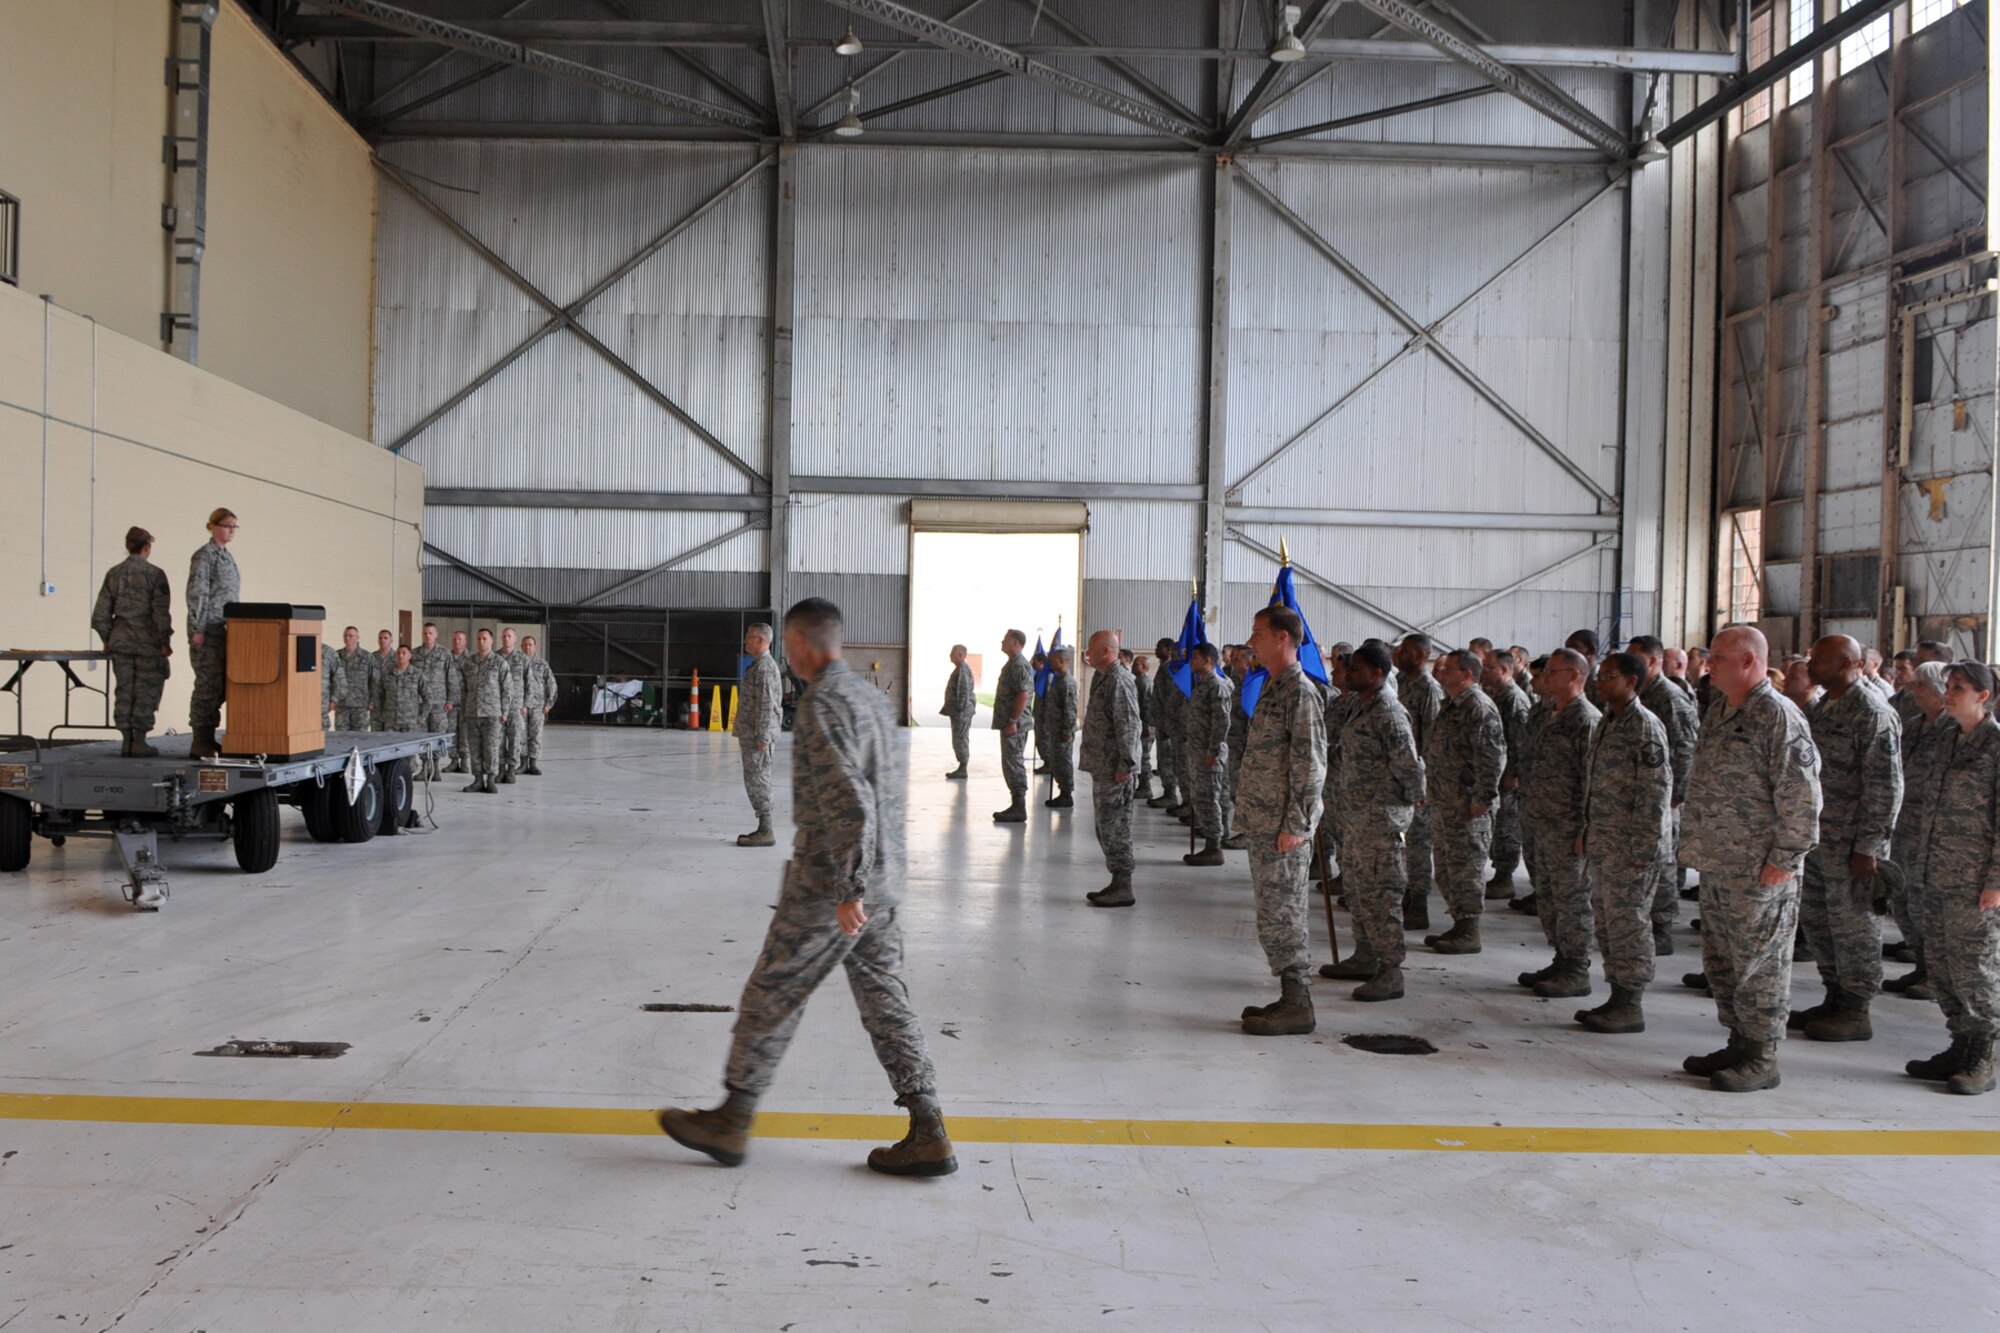 Lt. Col. Kenneth Rose, commander, 307th Maintenance Group, walks to the stage during commander’s call in Hangar One at Barksdale Air Force Base, La., Nov. 4, 2012. This was the first commander’s call held in the hangar since its remodeling. (U.S. Air Force photo by Master Sgt. Jeff Walston/ Released)